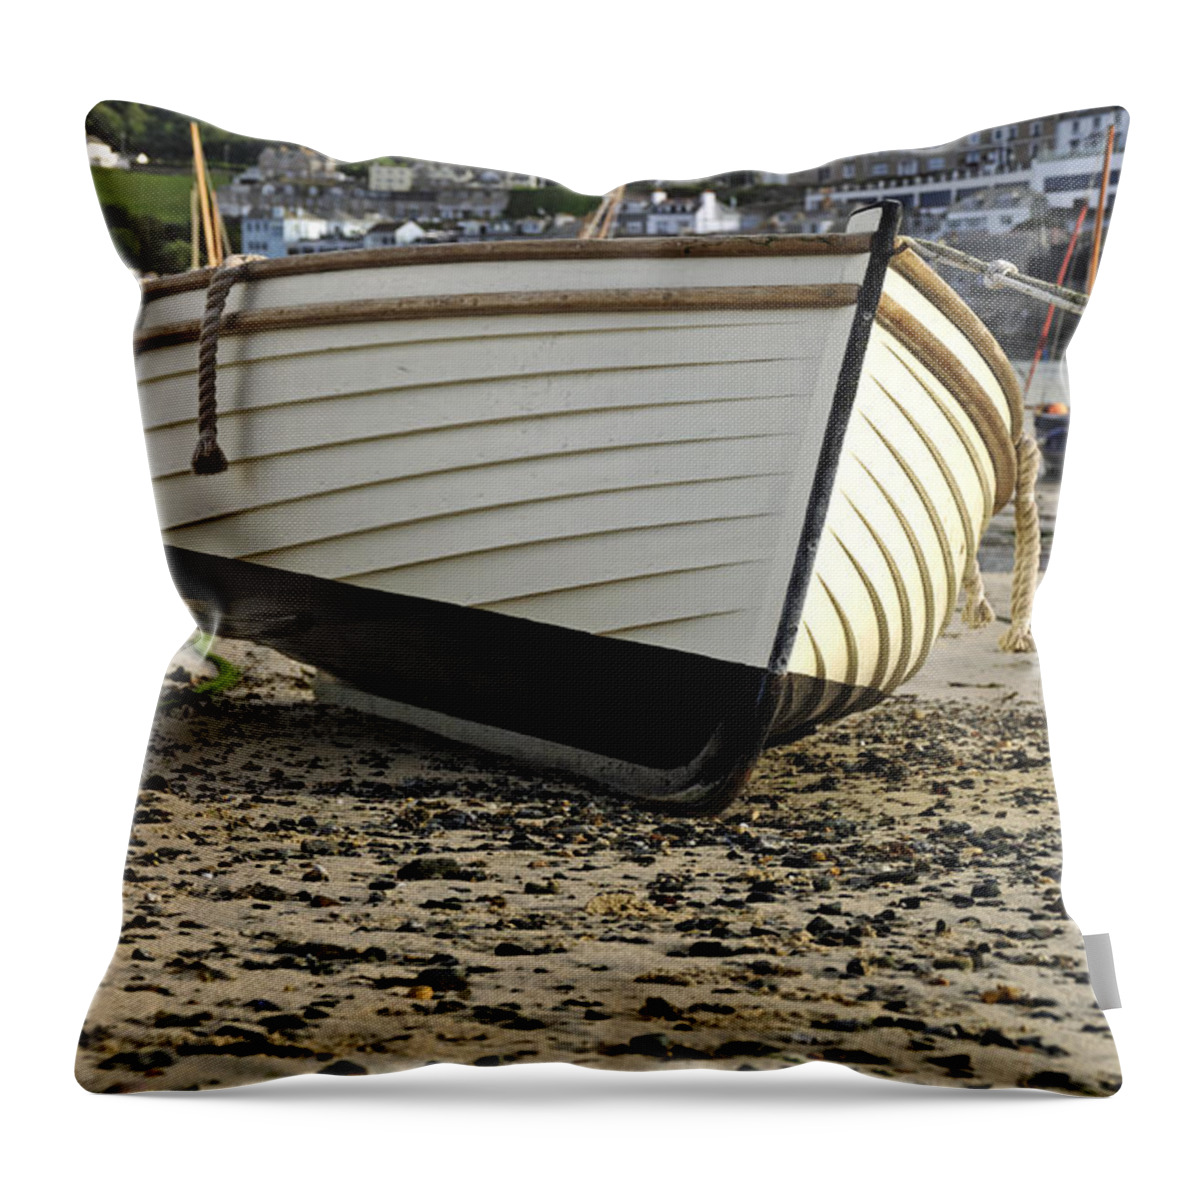 Britain Throw Pillow featuring the photograph Boat On The Beach - St Ives Harbour by Rod Johnson